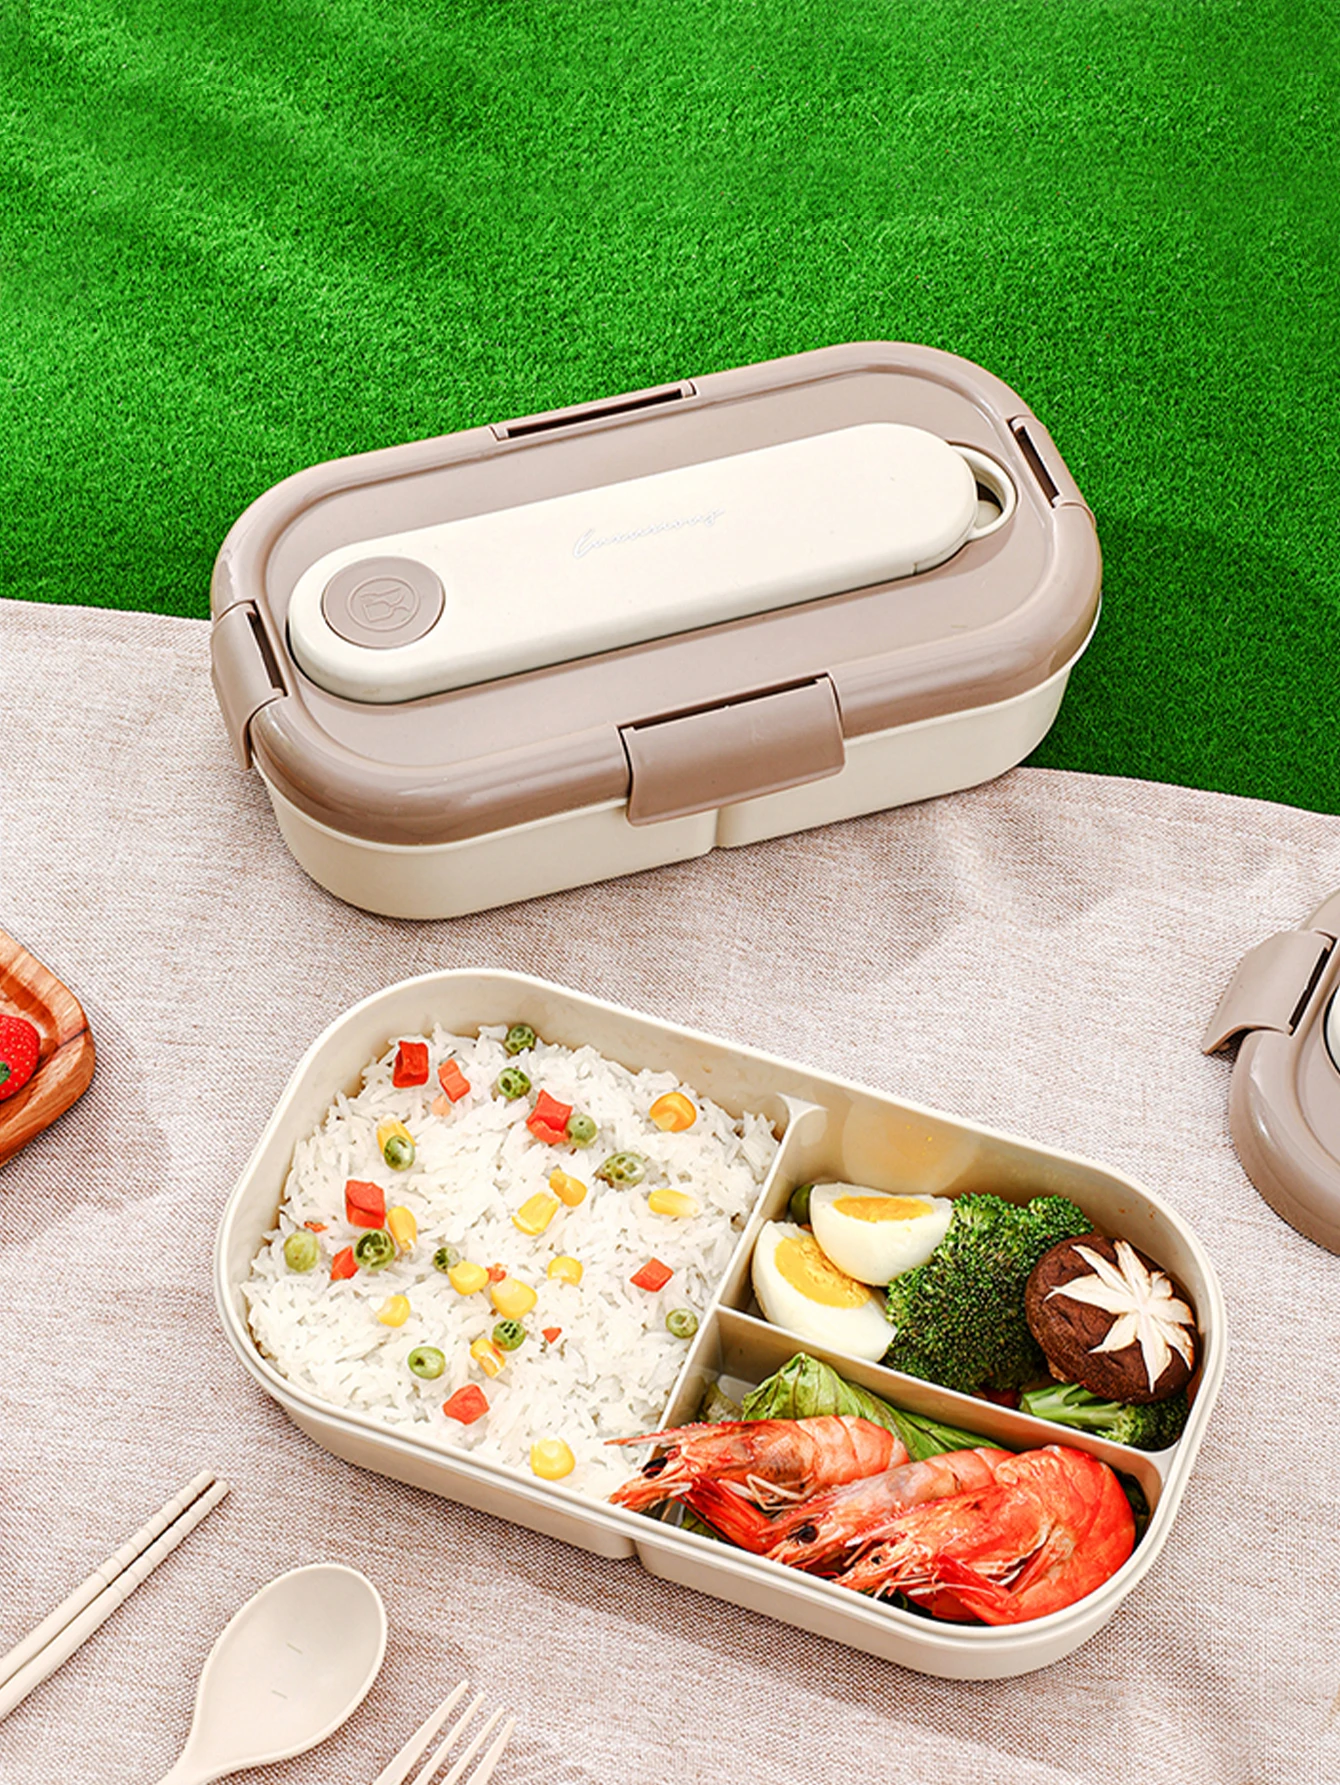 WORTHBUY Portable Plastics Bento Box For Adults Kids,Food Storage Container  Outdoor Home Microwavable Lunch Box